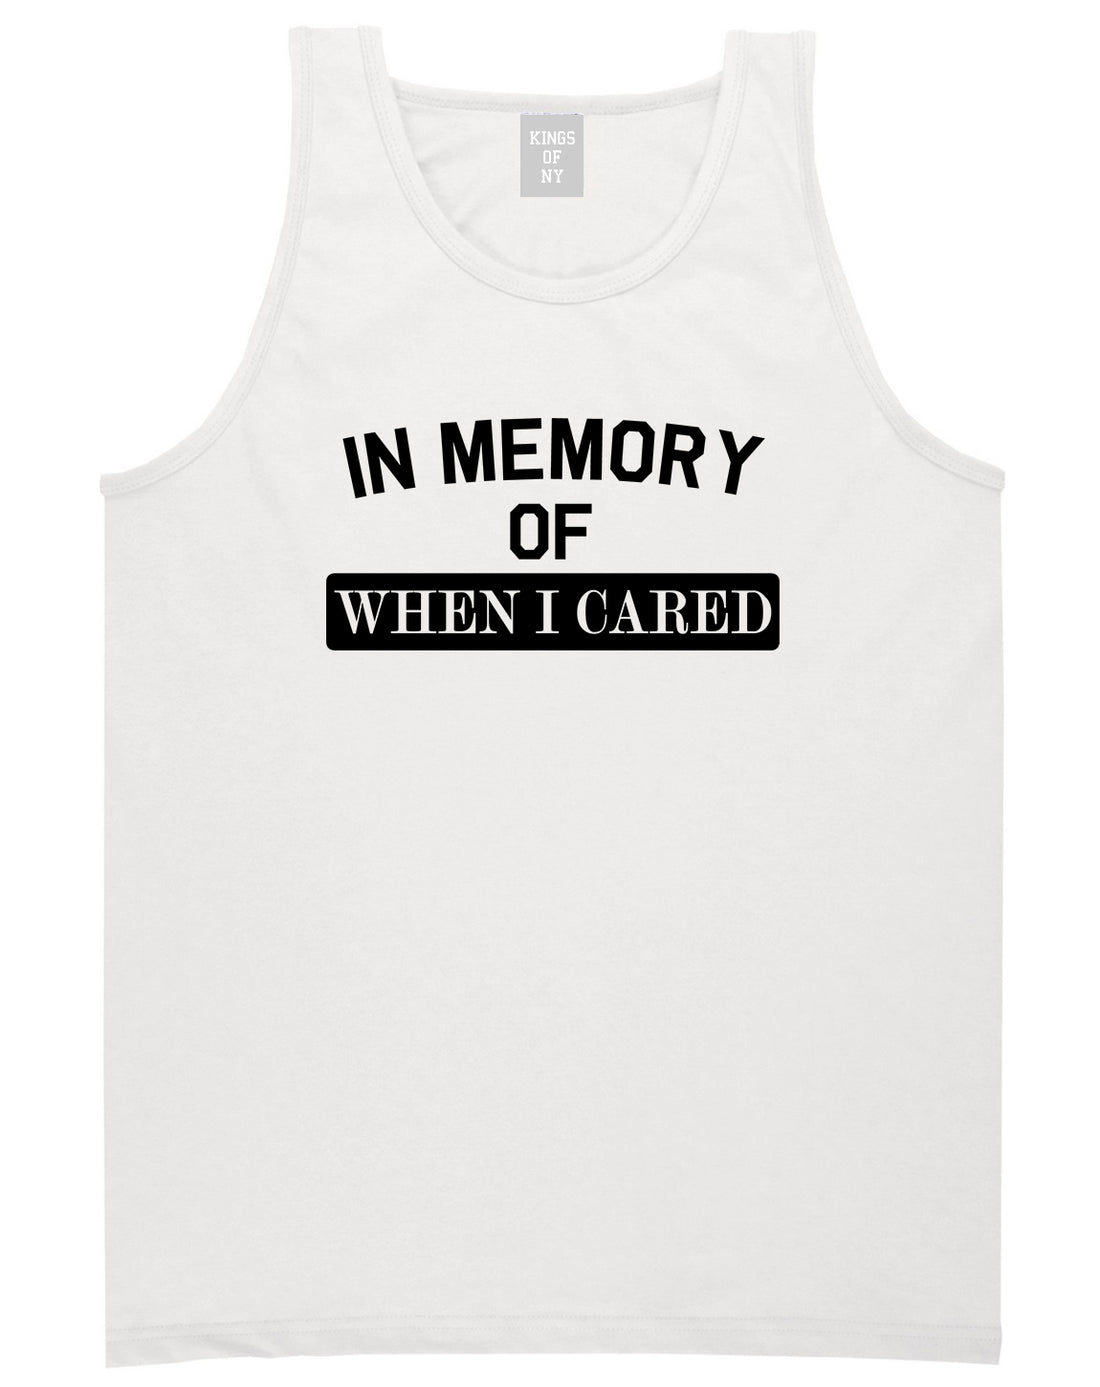 In Memory Of When I Cared Mens Tank Top T-Shirt White